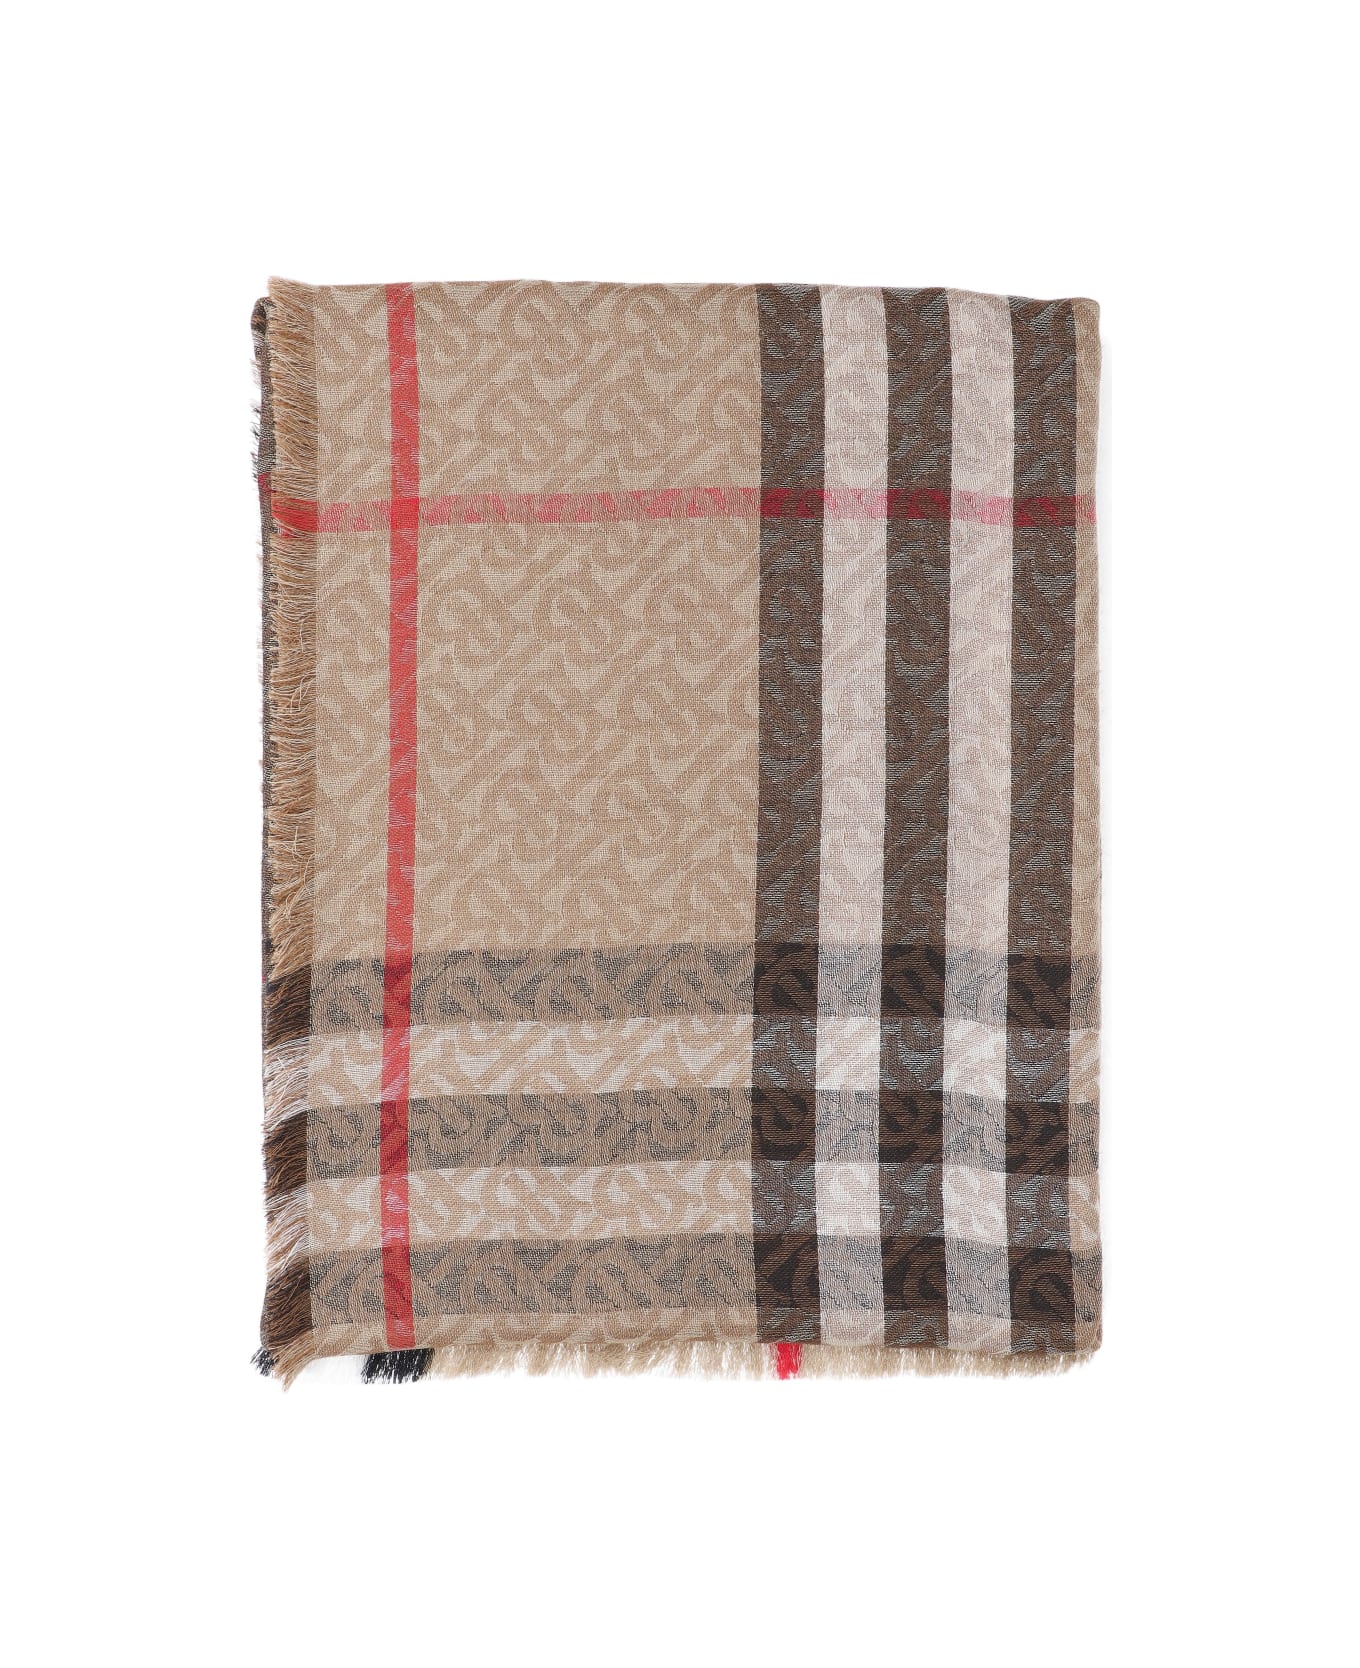 Burberry Embroidered Wool Blend Scarf - Beige